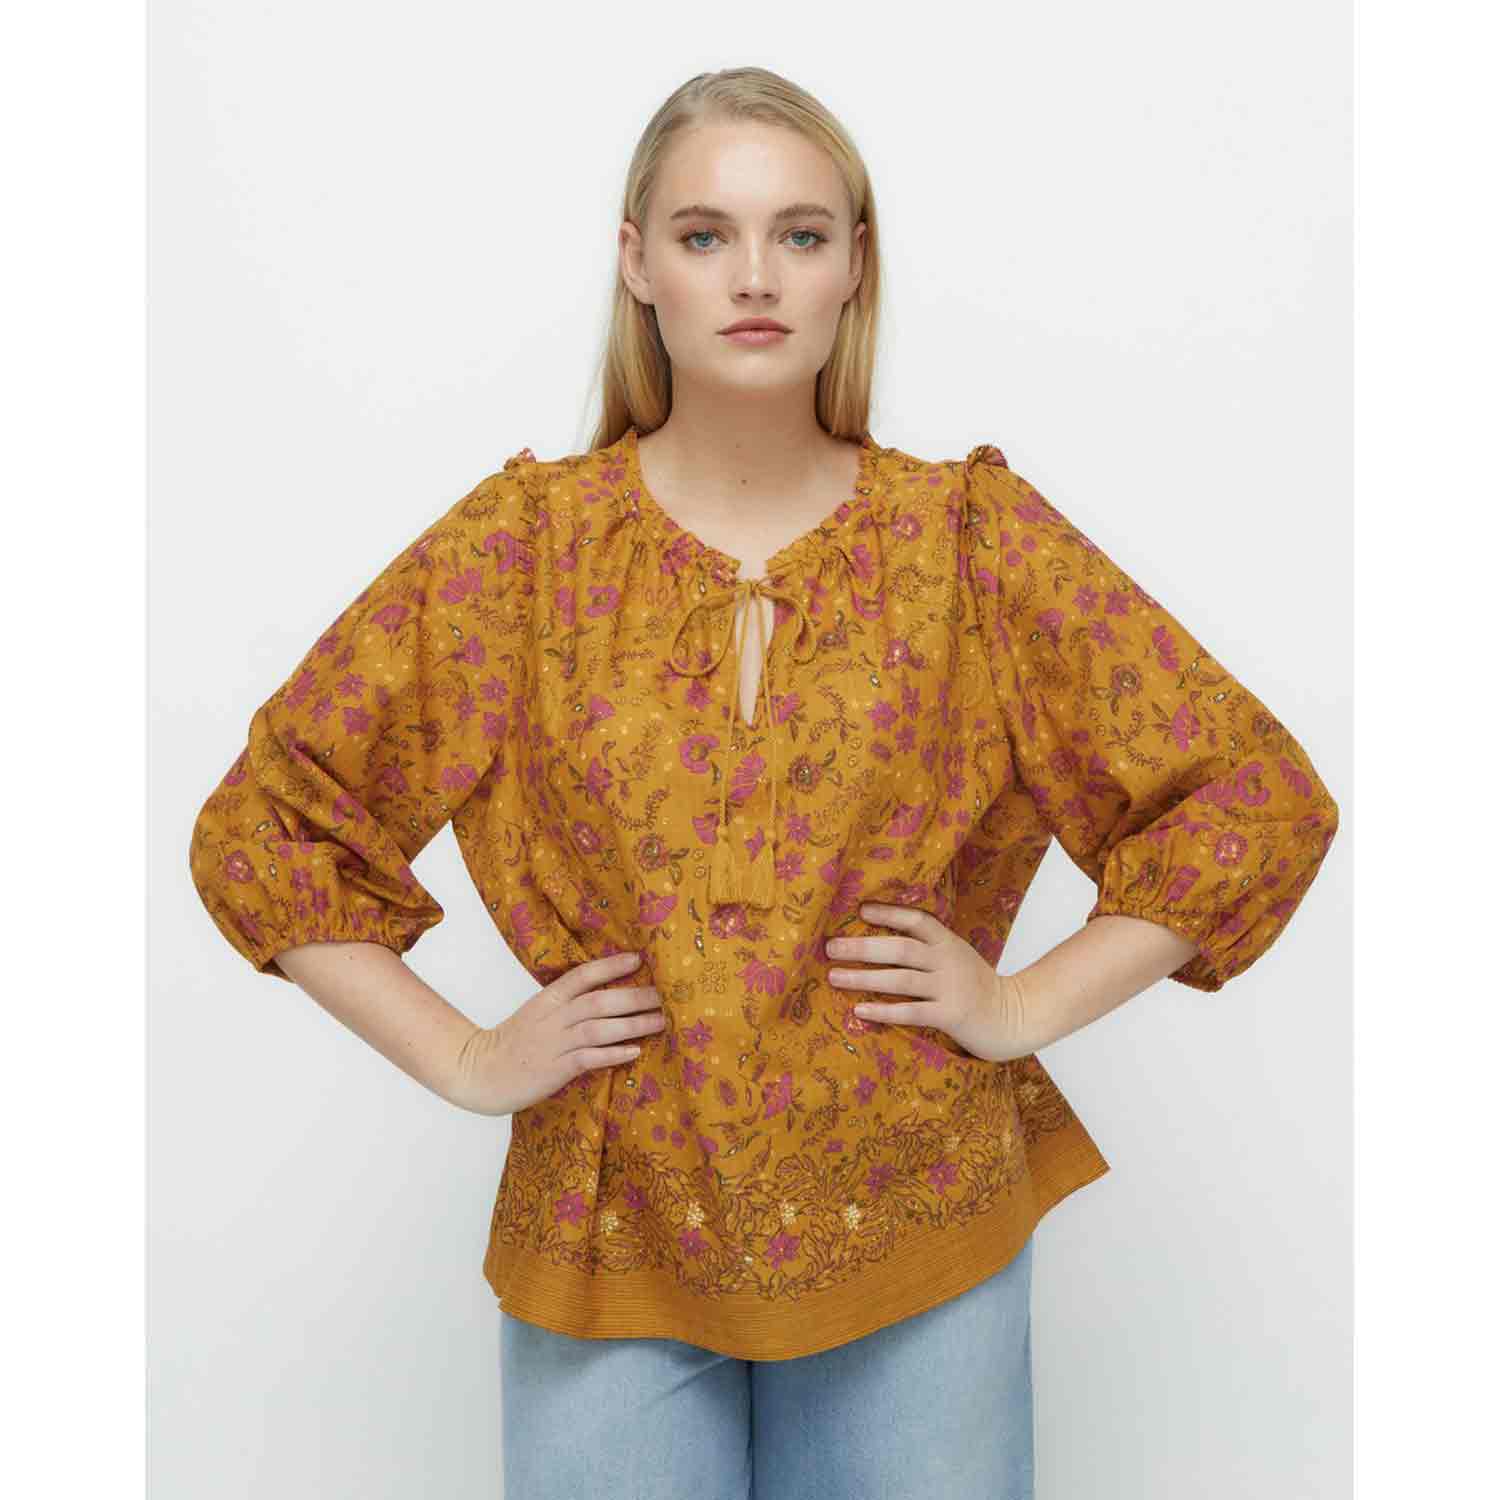 Couchel Blouse With French Sleeves And Tassels 1 Shaws Department Stores